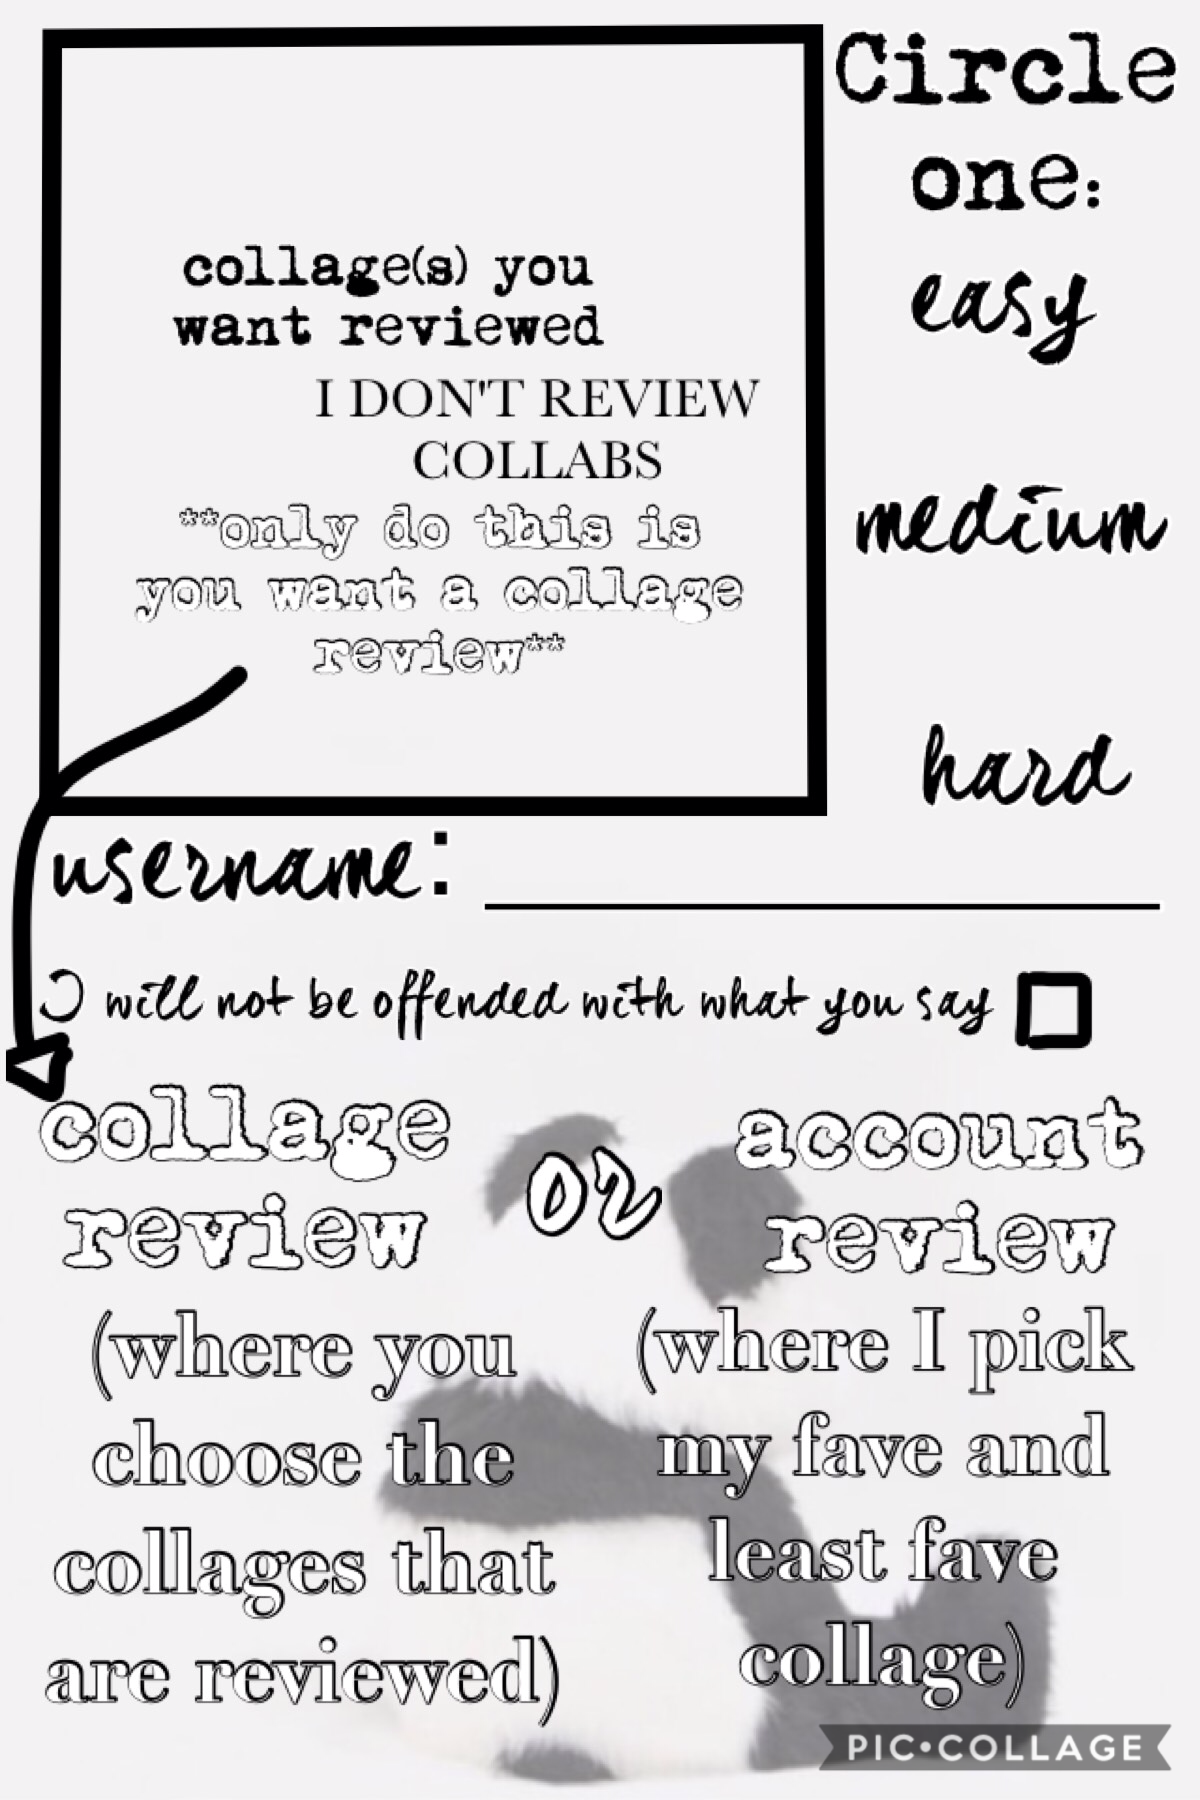 Sorry this is kind of messy 😬 Basically, a collage review is where you put in one or two of the collages you want me to review and I'll review those. An account review is where I pick my favorite and least favorite collages of yours and review those. I'll